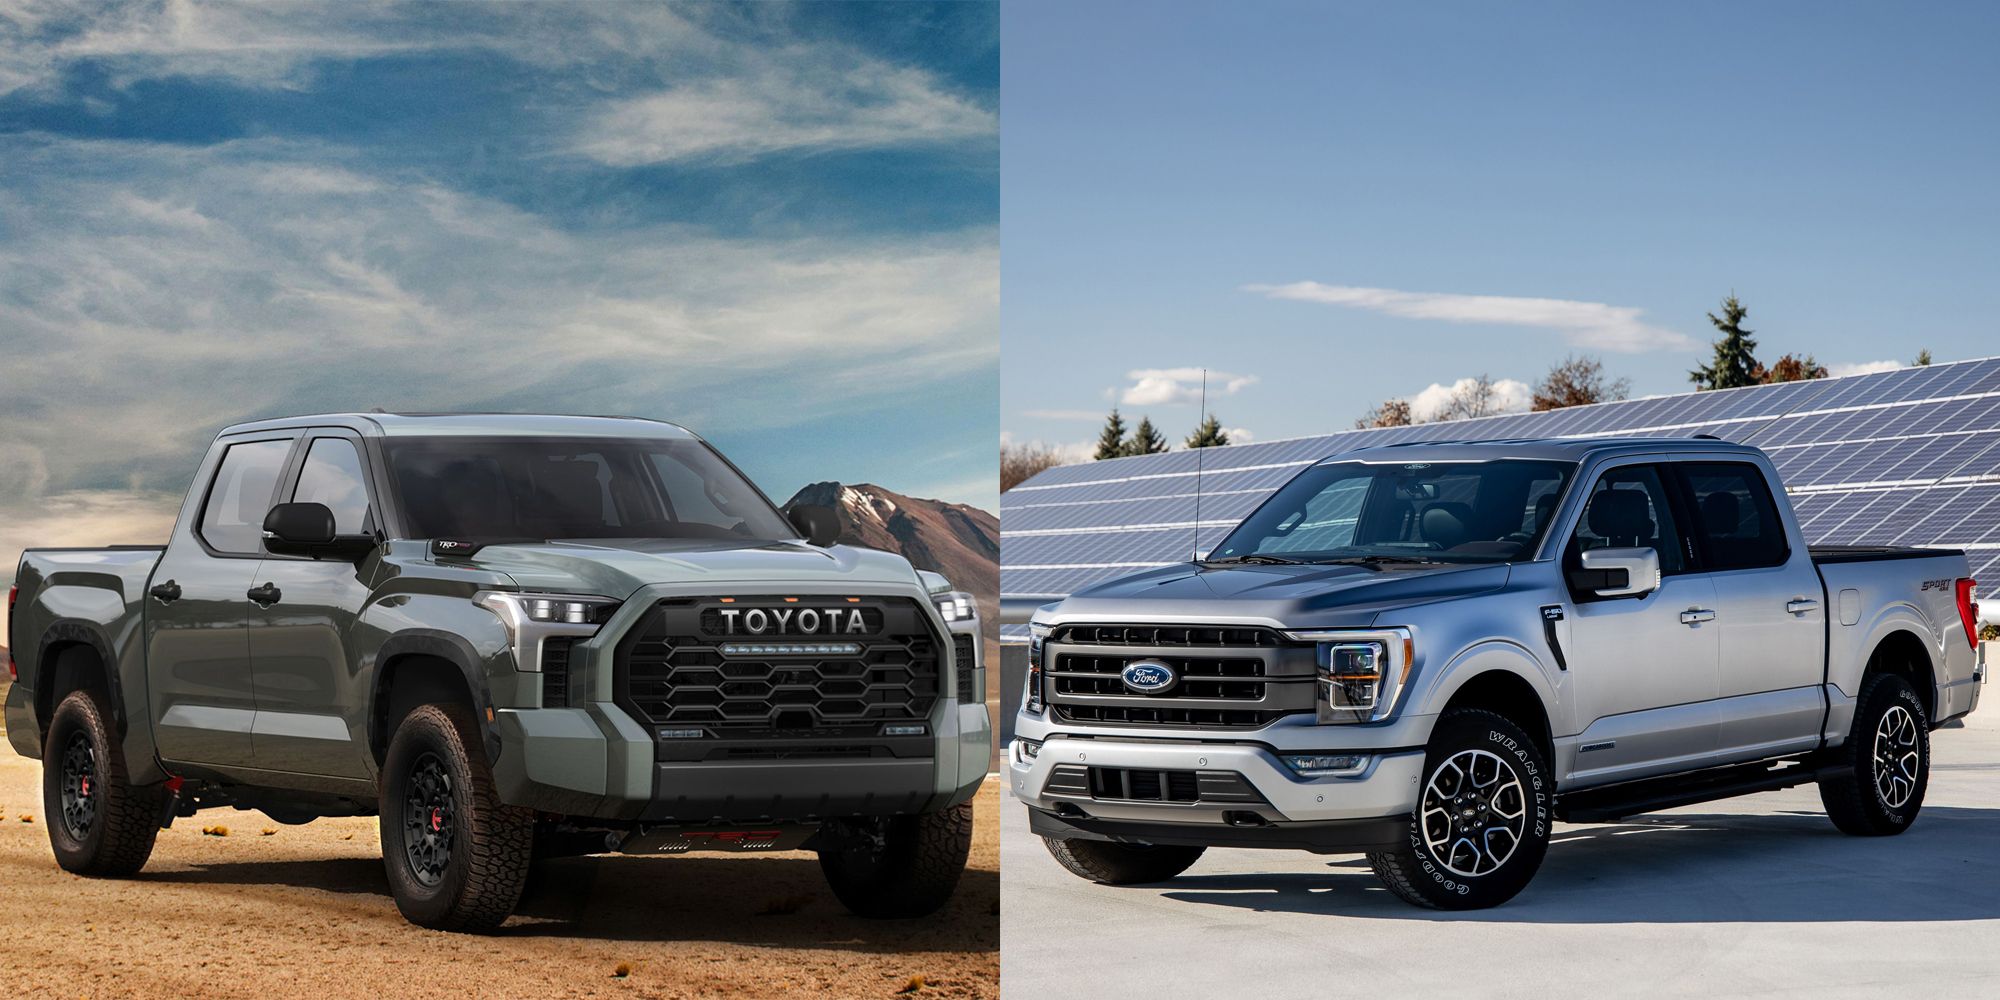 2022 Toyota Tundra Hybrid Is Going after the F-150 PowerBoost